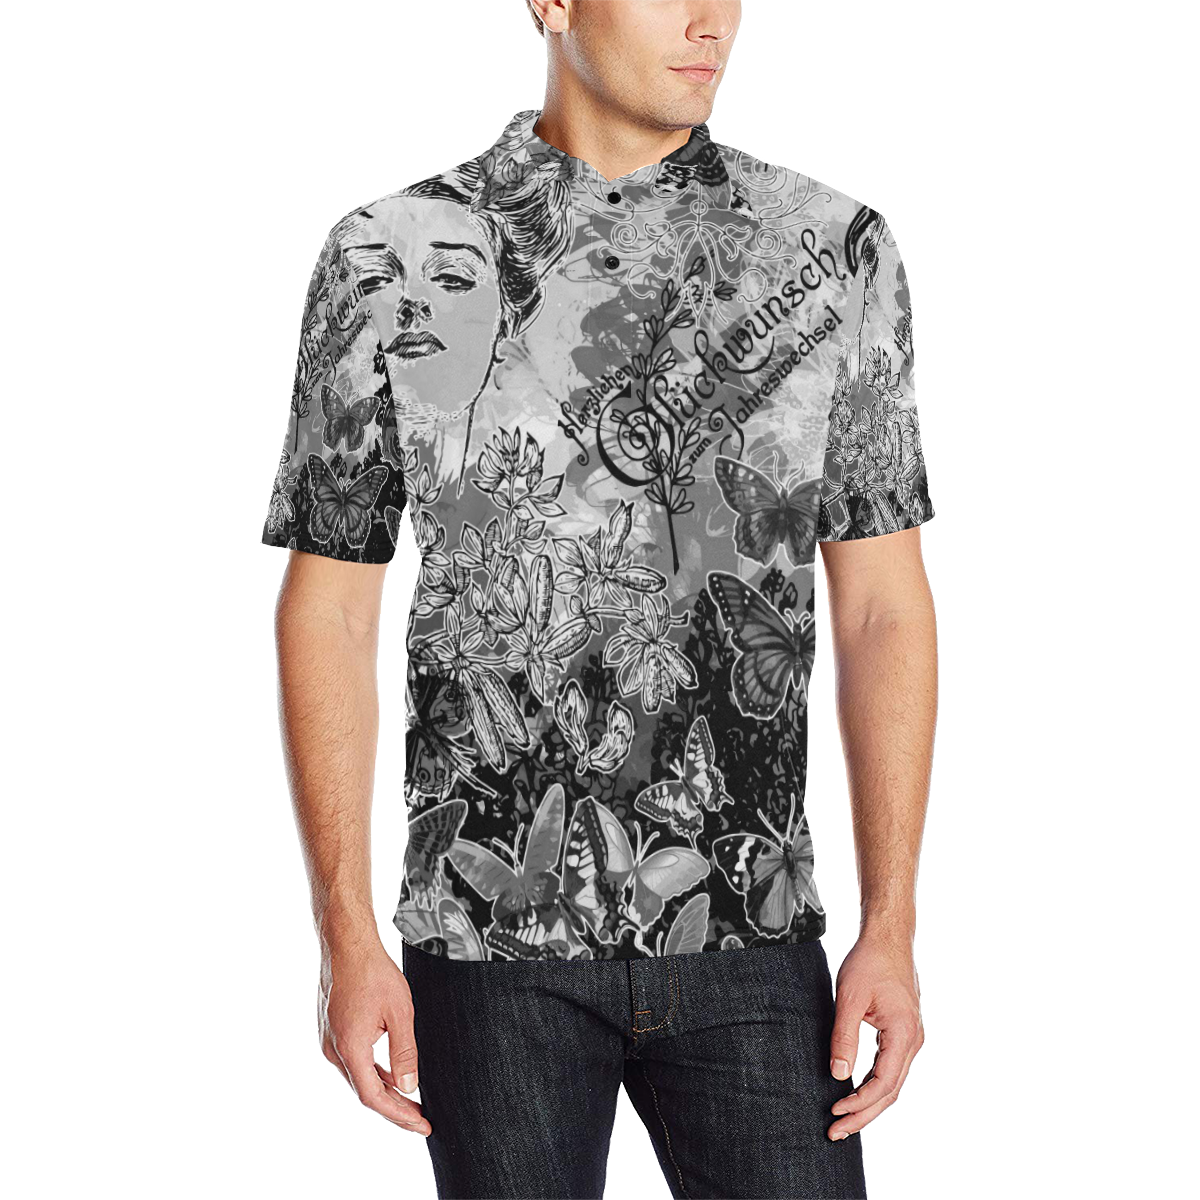 Lady and butterflies Men's All Over Print Polo Shirt (Model T55)